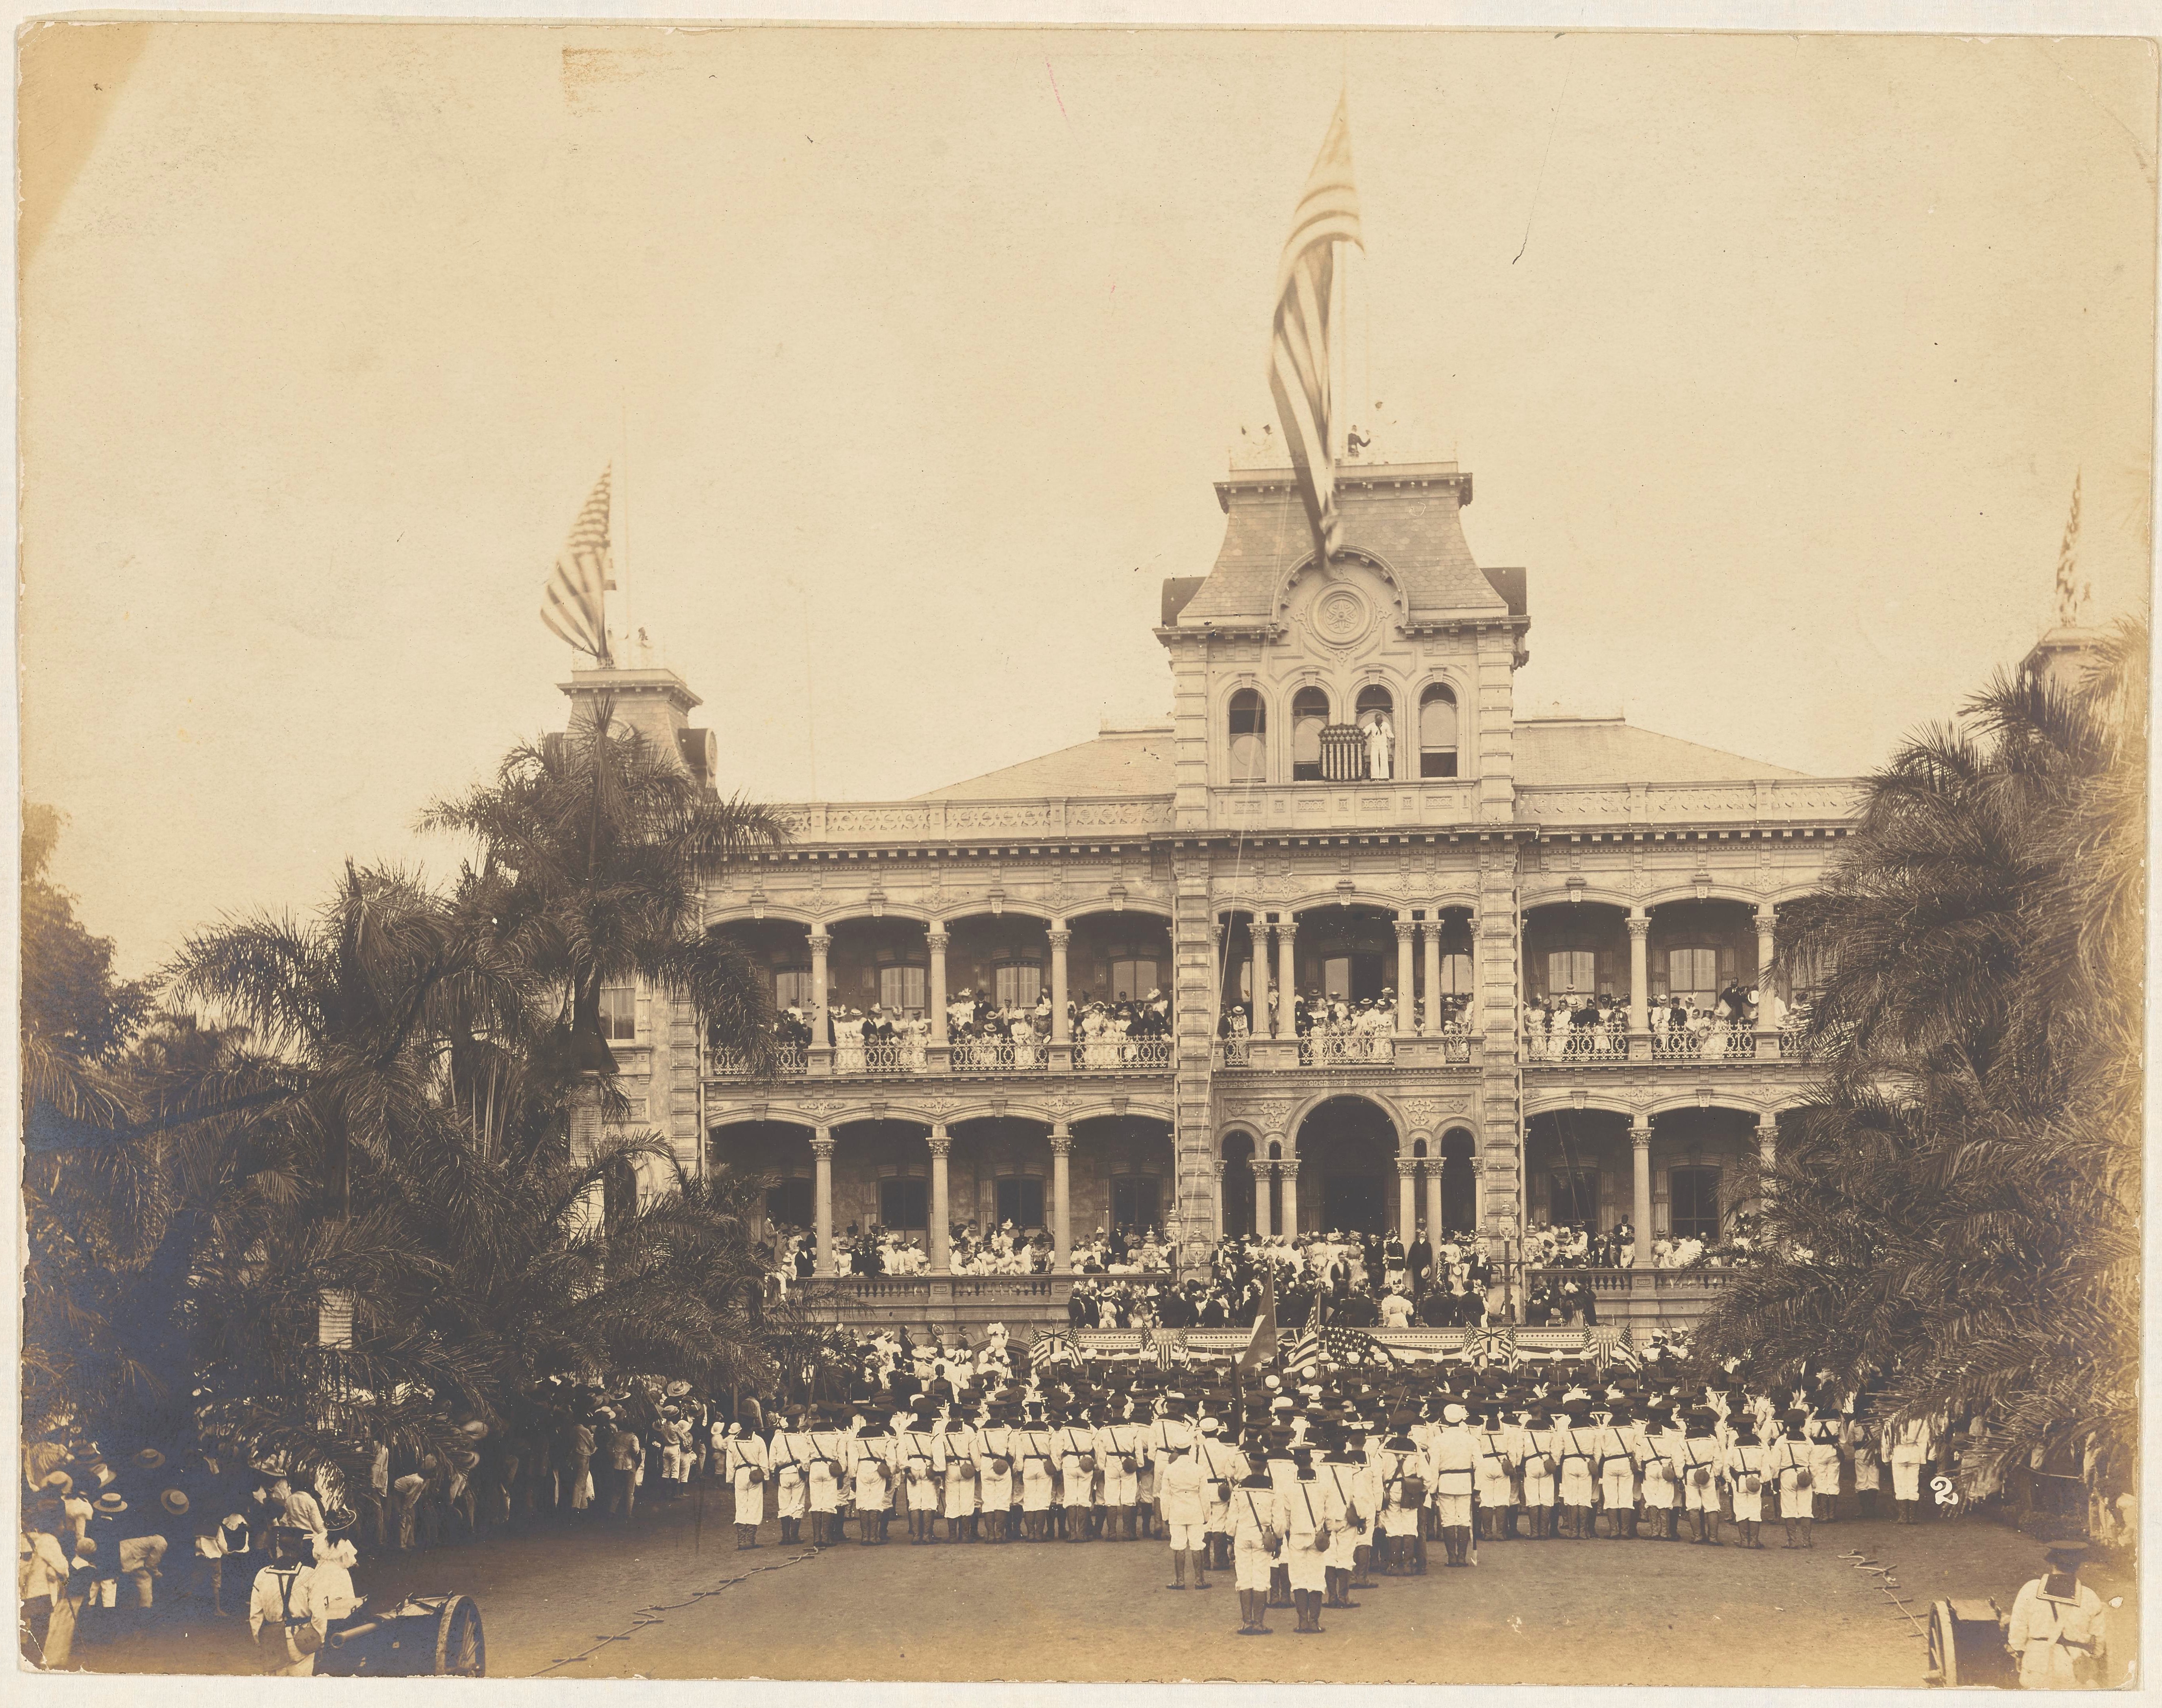 Large palatial building with three United States flags mounted on the roof. Military people stand facing the building in a ceremonial formation. Non-military people stand on the building's balcony facing the military people.